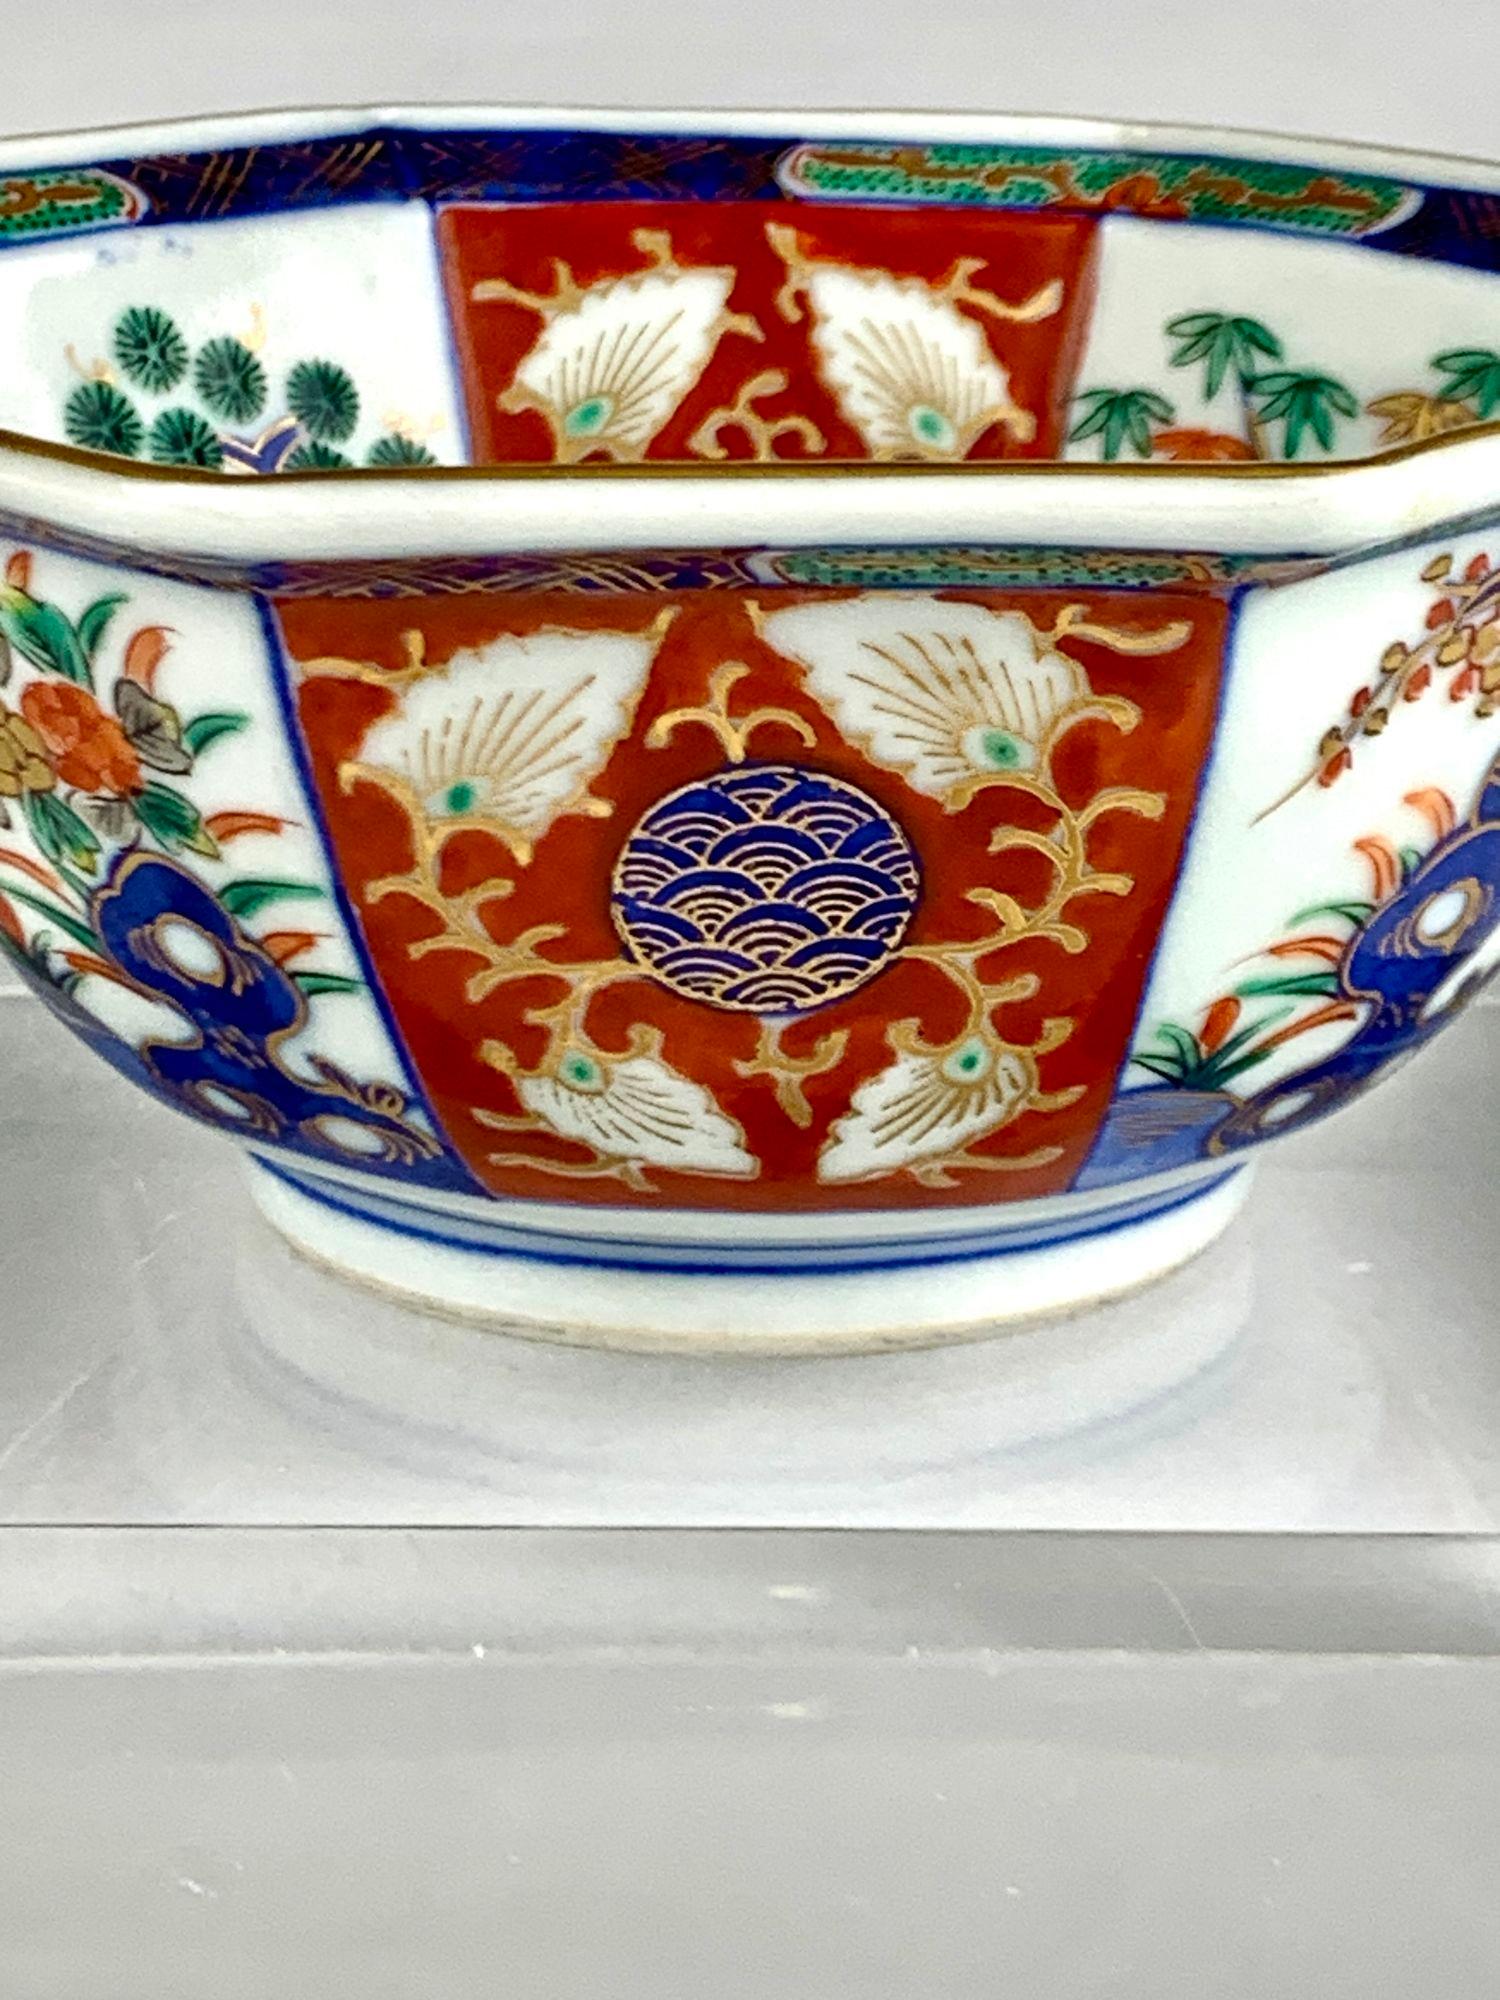 This delicate Japanese bowl was handpainted during the Meiji Period, circa 1880.
The traditional octagonal shape is decorated with eight panels in the Imari style.
We see panels in iron red with a gold and blue wave pattern in the center.
These